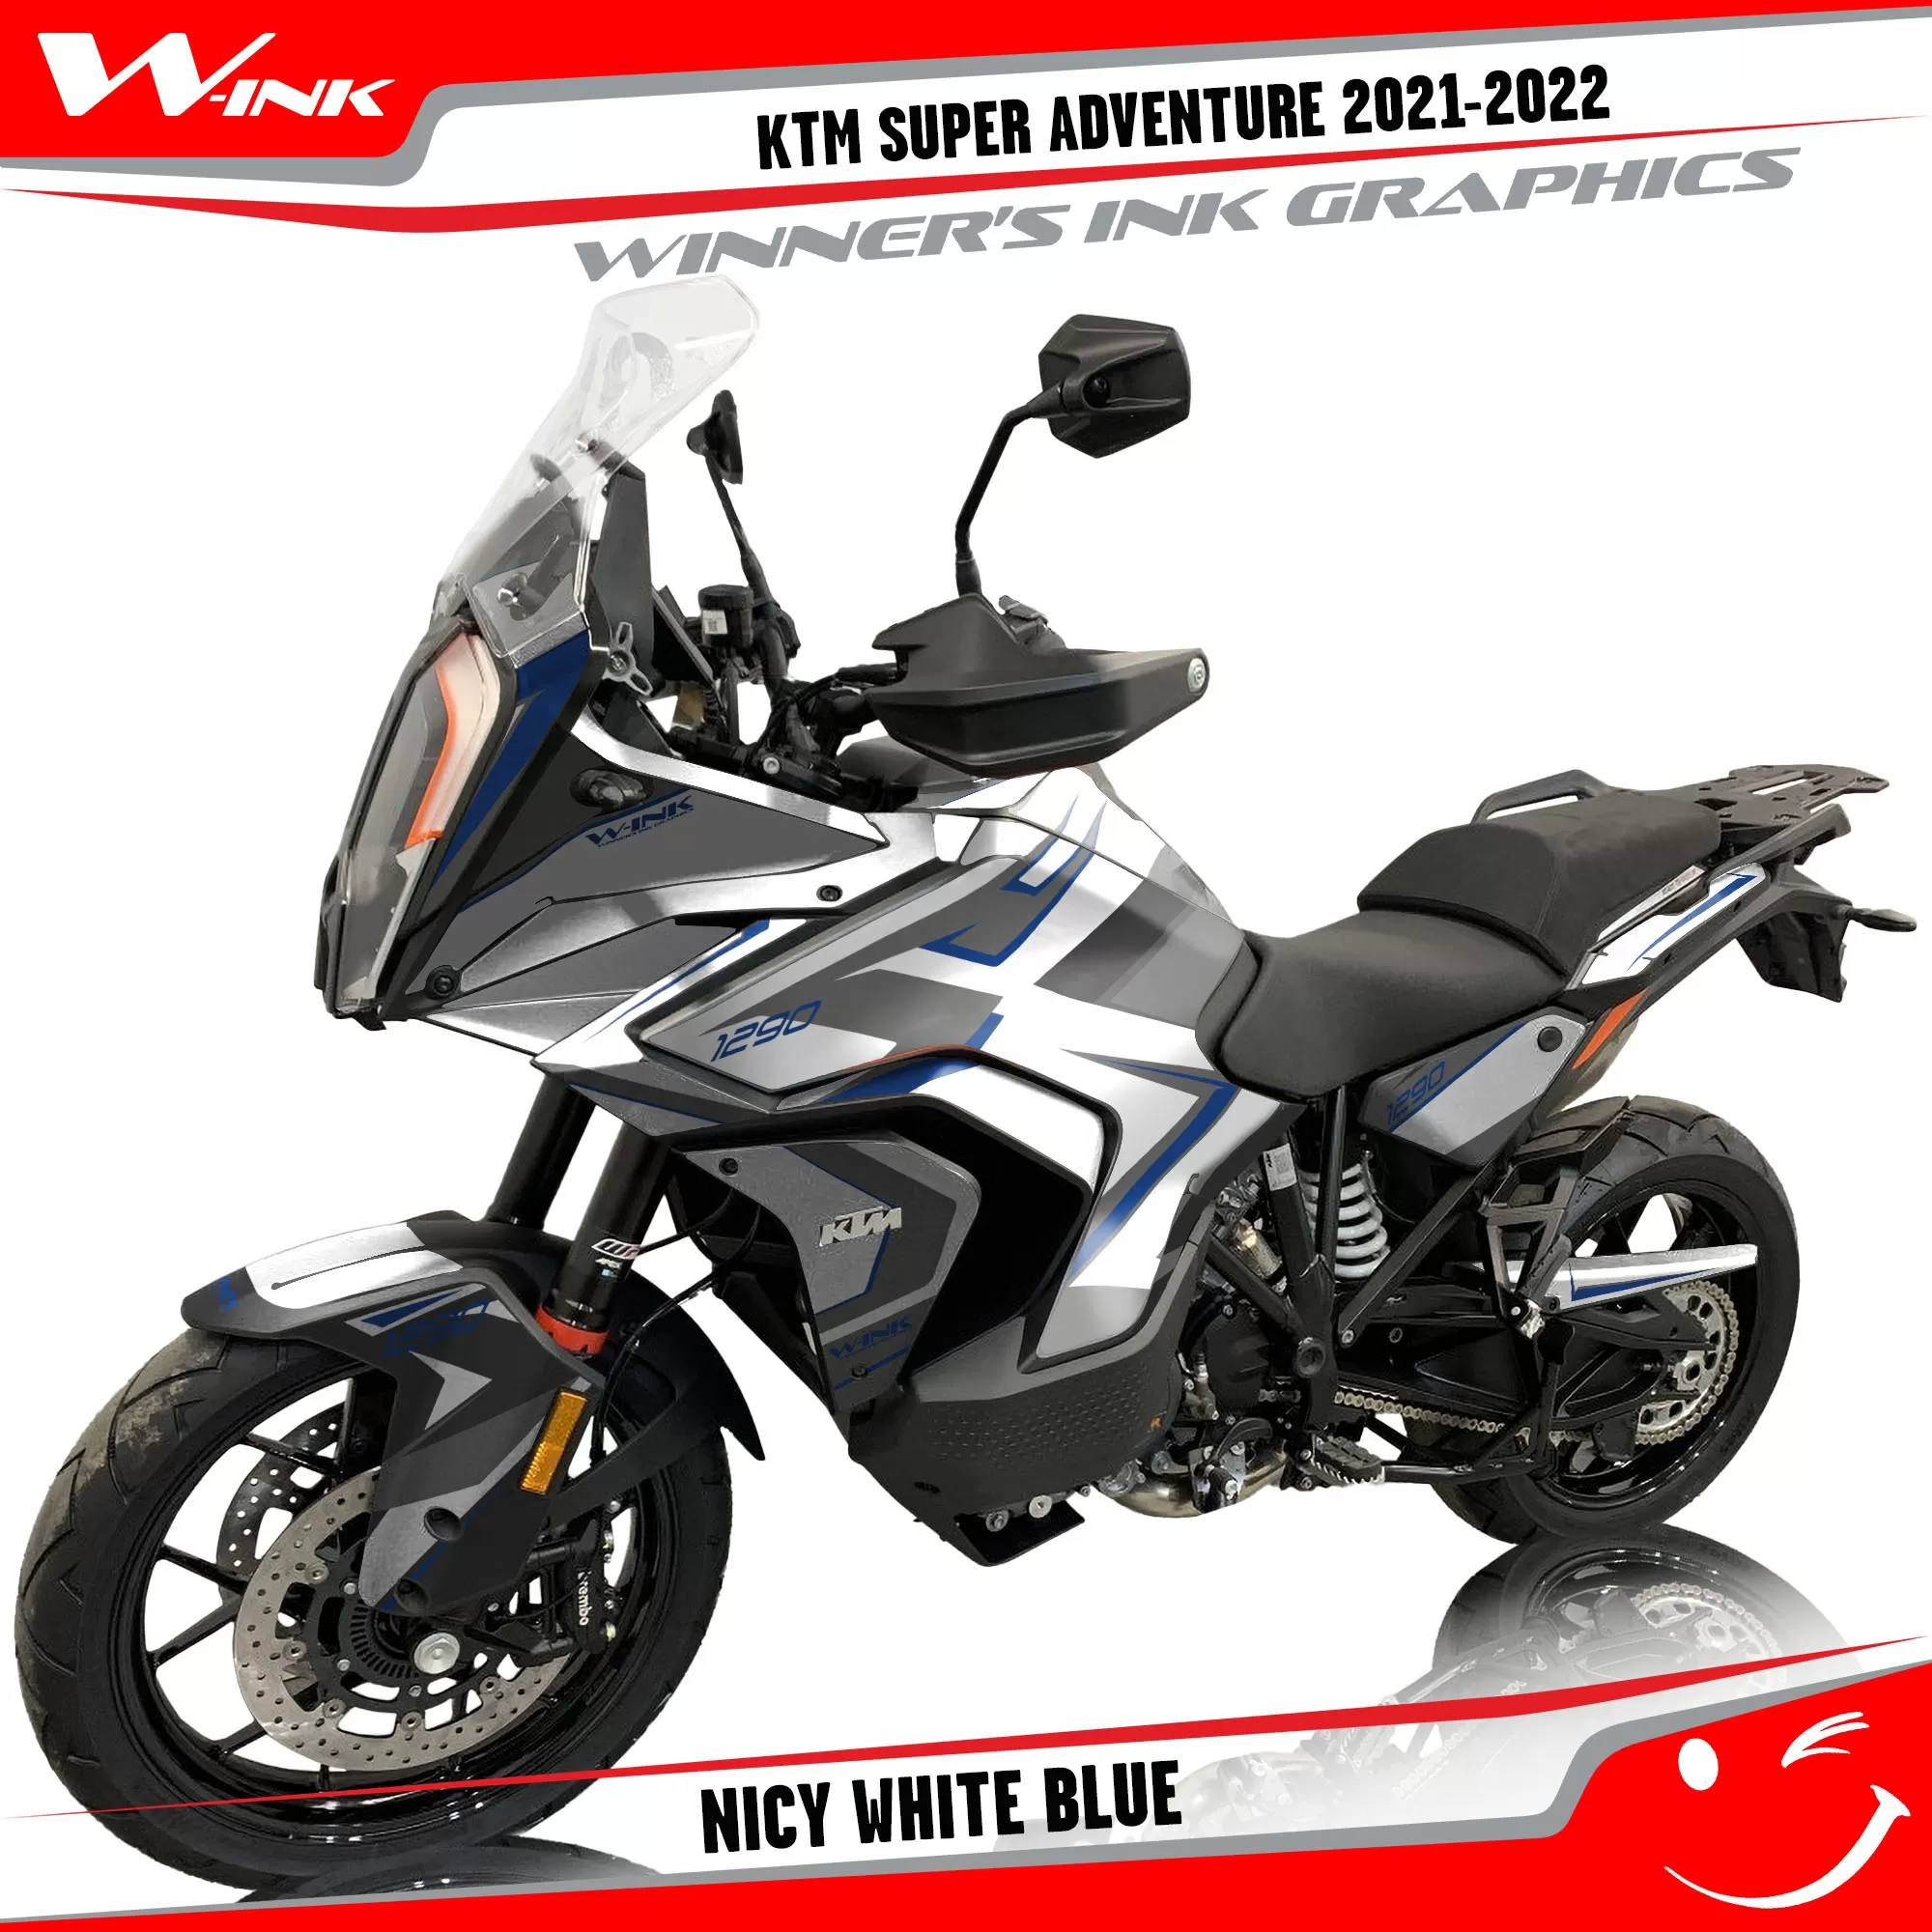 KTM-Super-Adventure-S-2021-2022-graphics-kit-and-decals-with-designs-Nicy-White-Blue